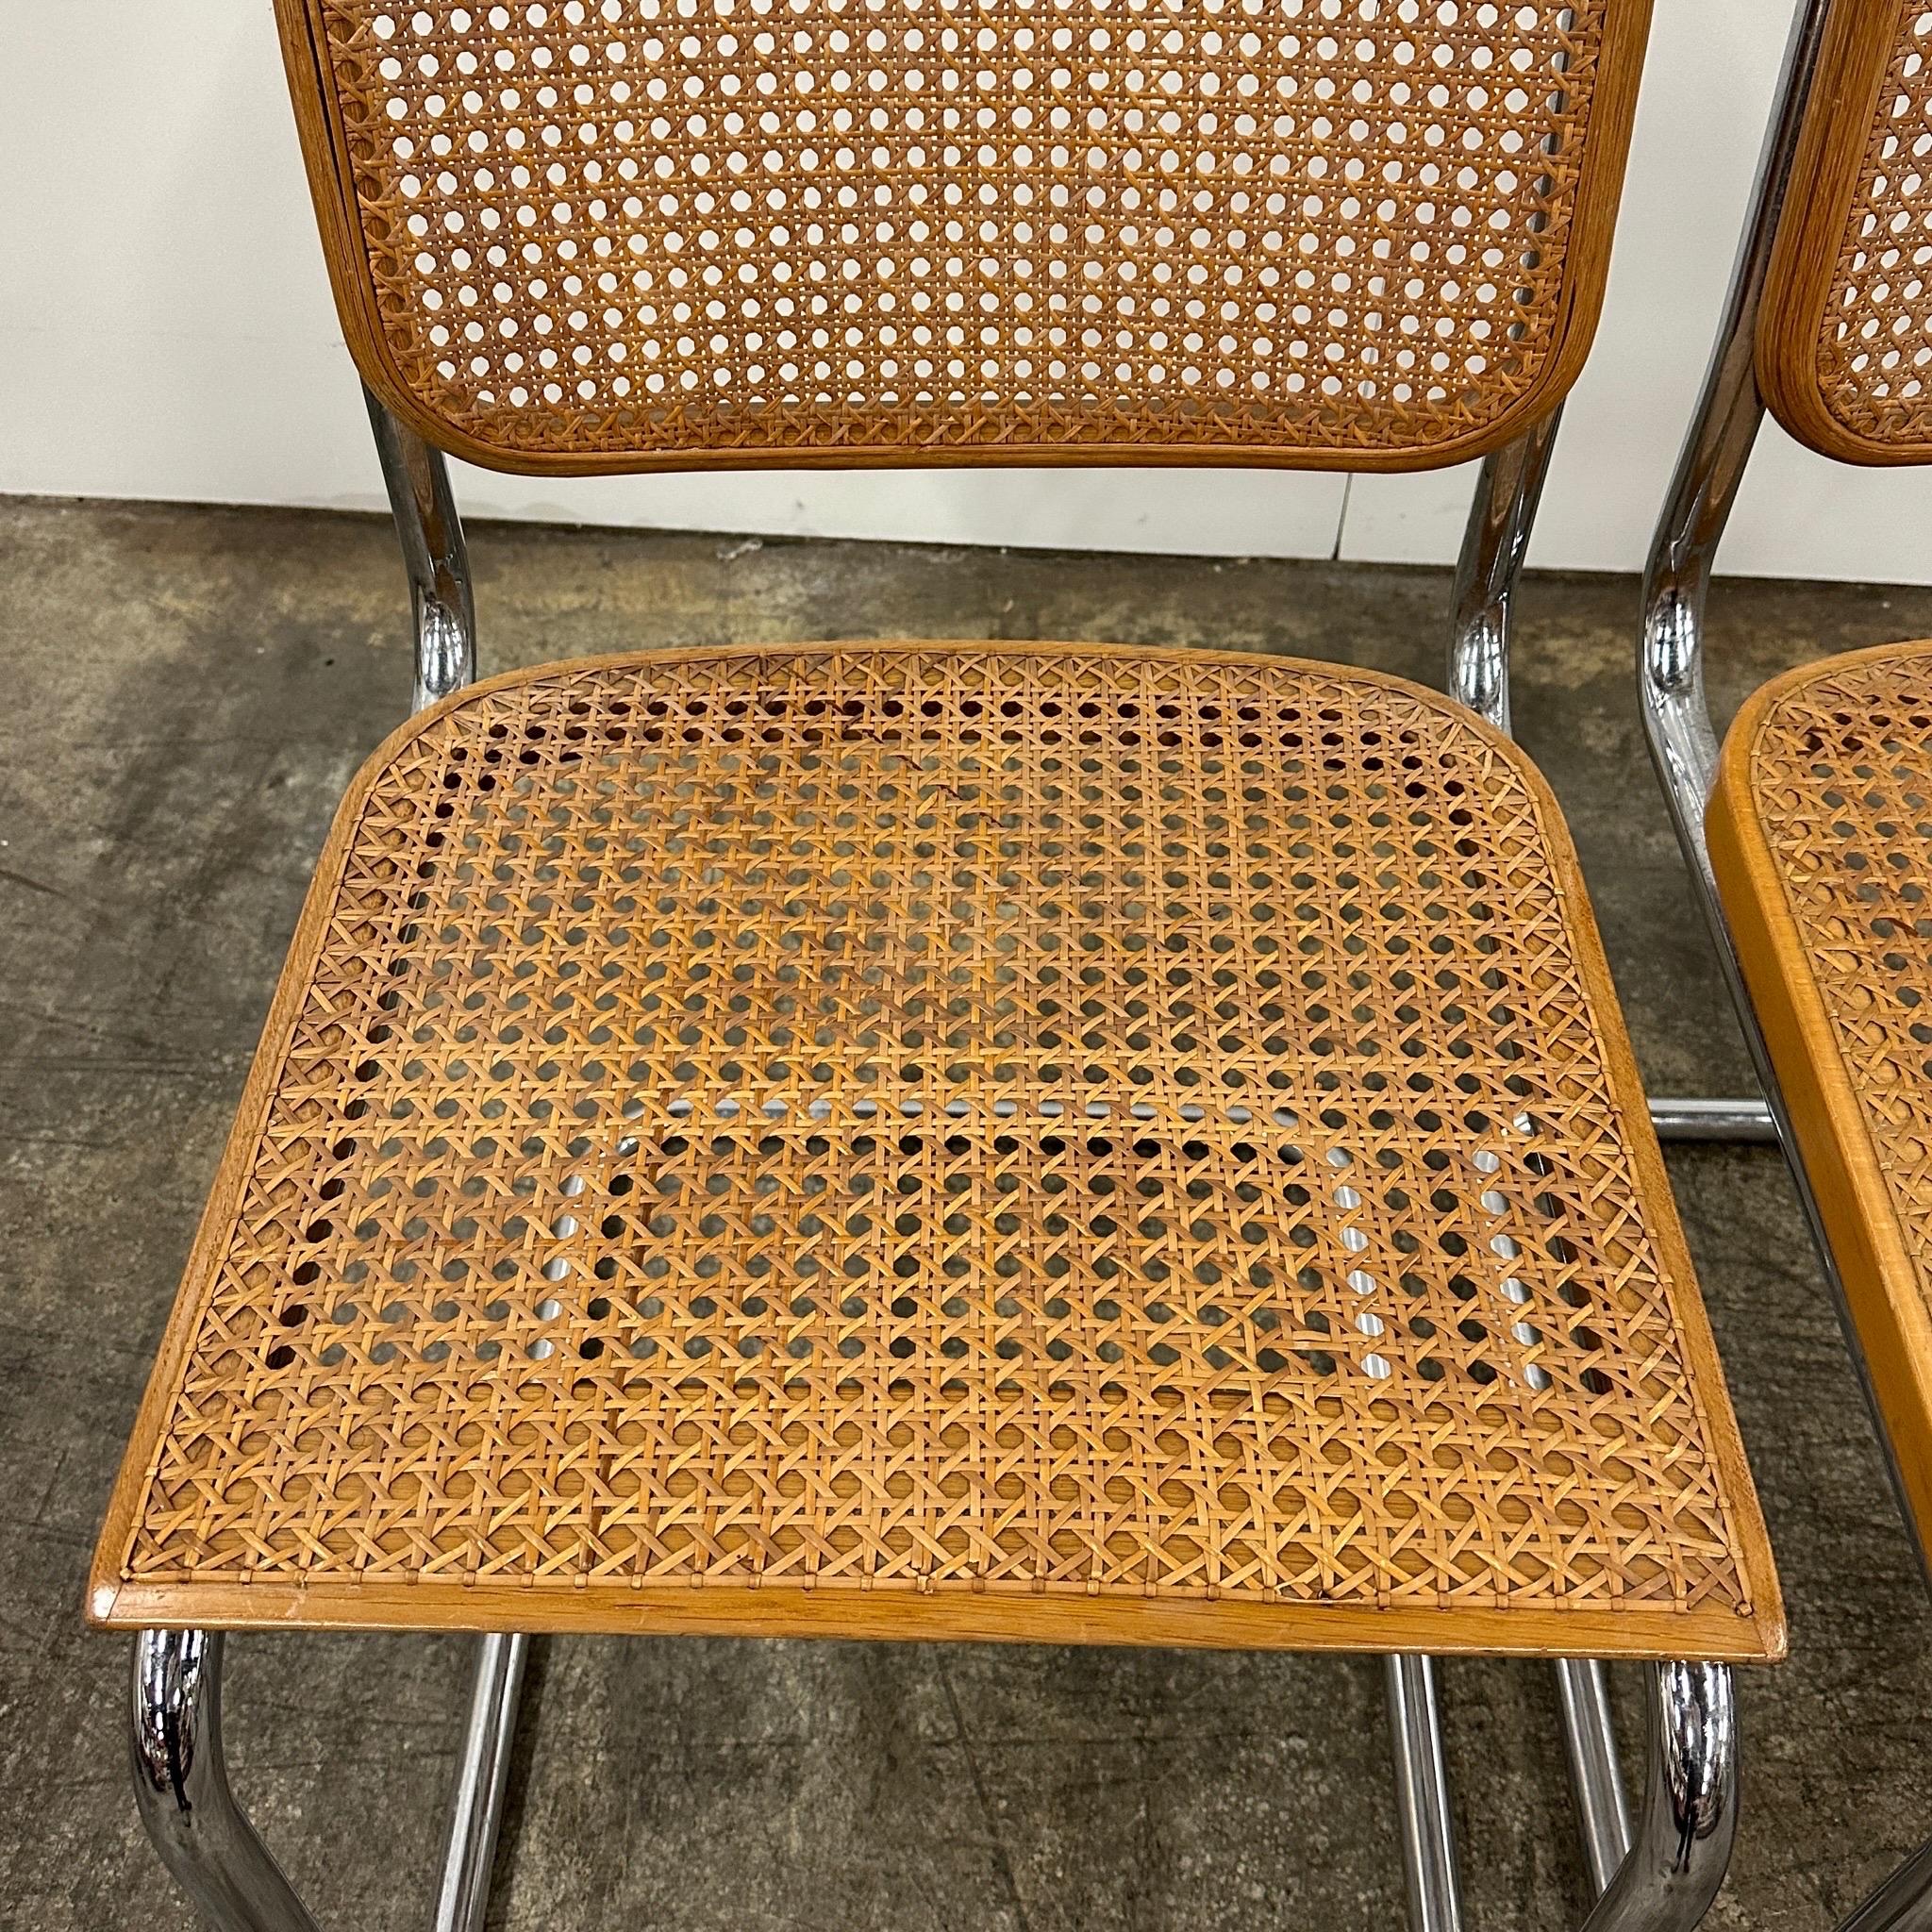 c. 1960s. Price is for the set. Contact us if you’d like to purchase a single item. These Cesca chairs are an original example of the armless B32 chair by Marcel Breuer. They are extremely rare in this condition, especially for a set of four. These